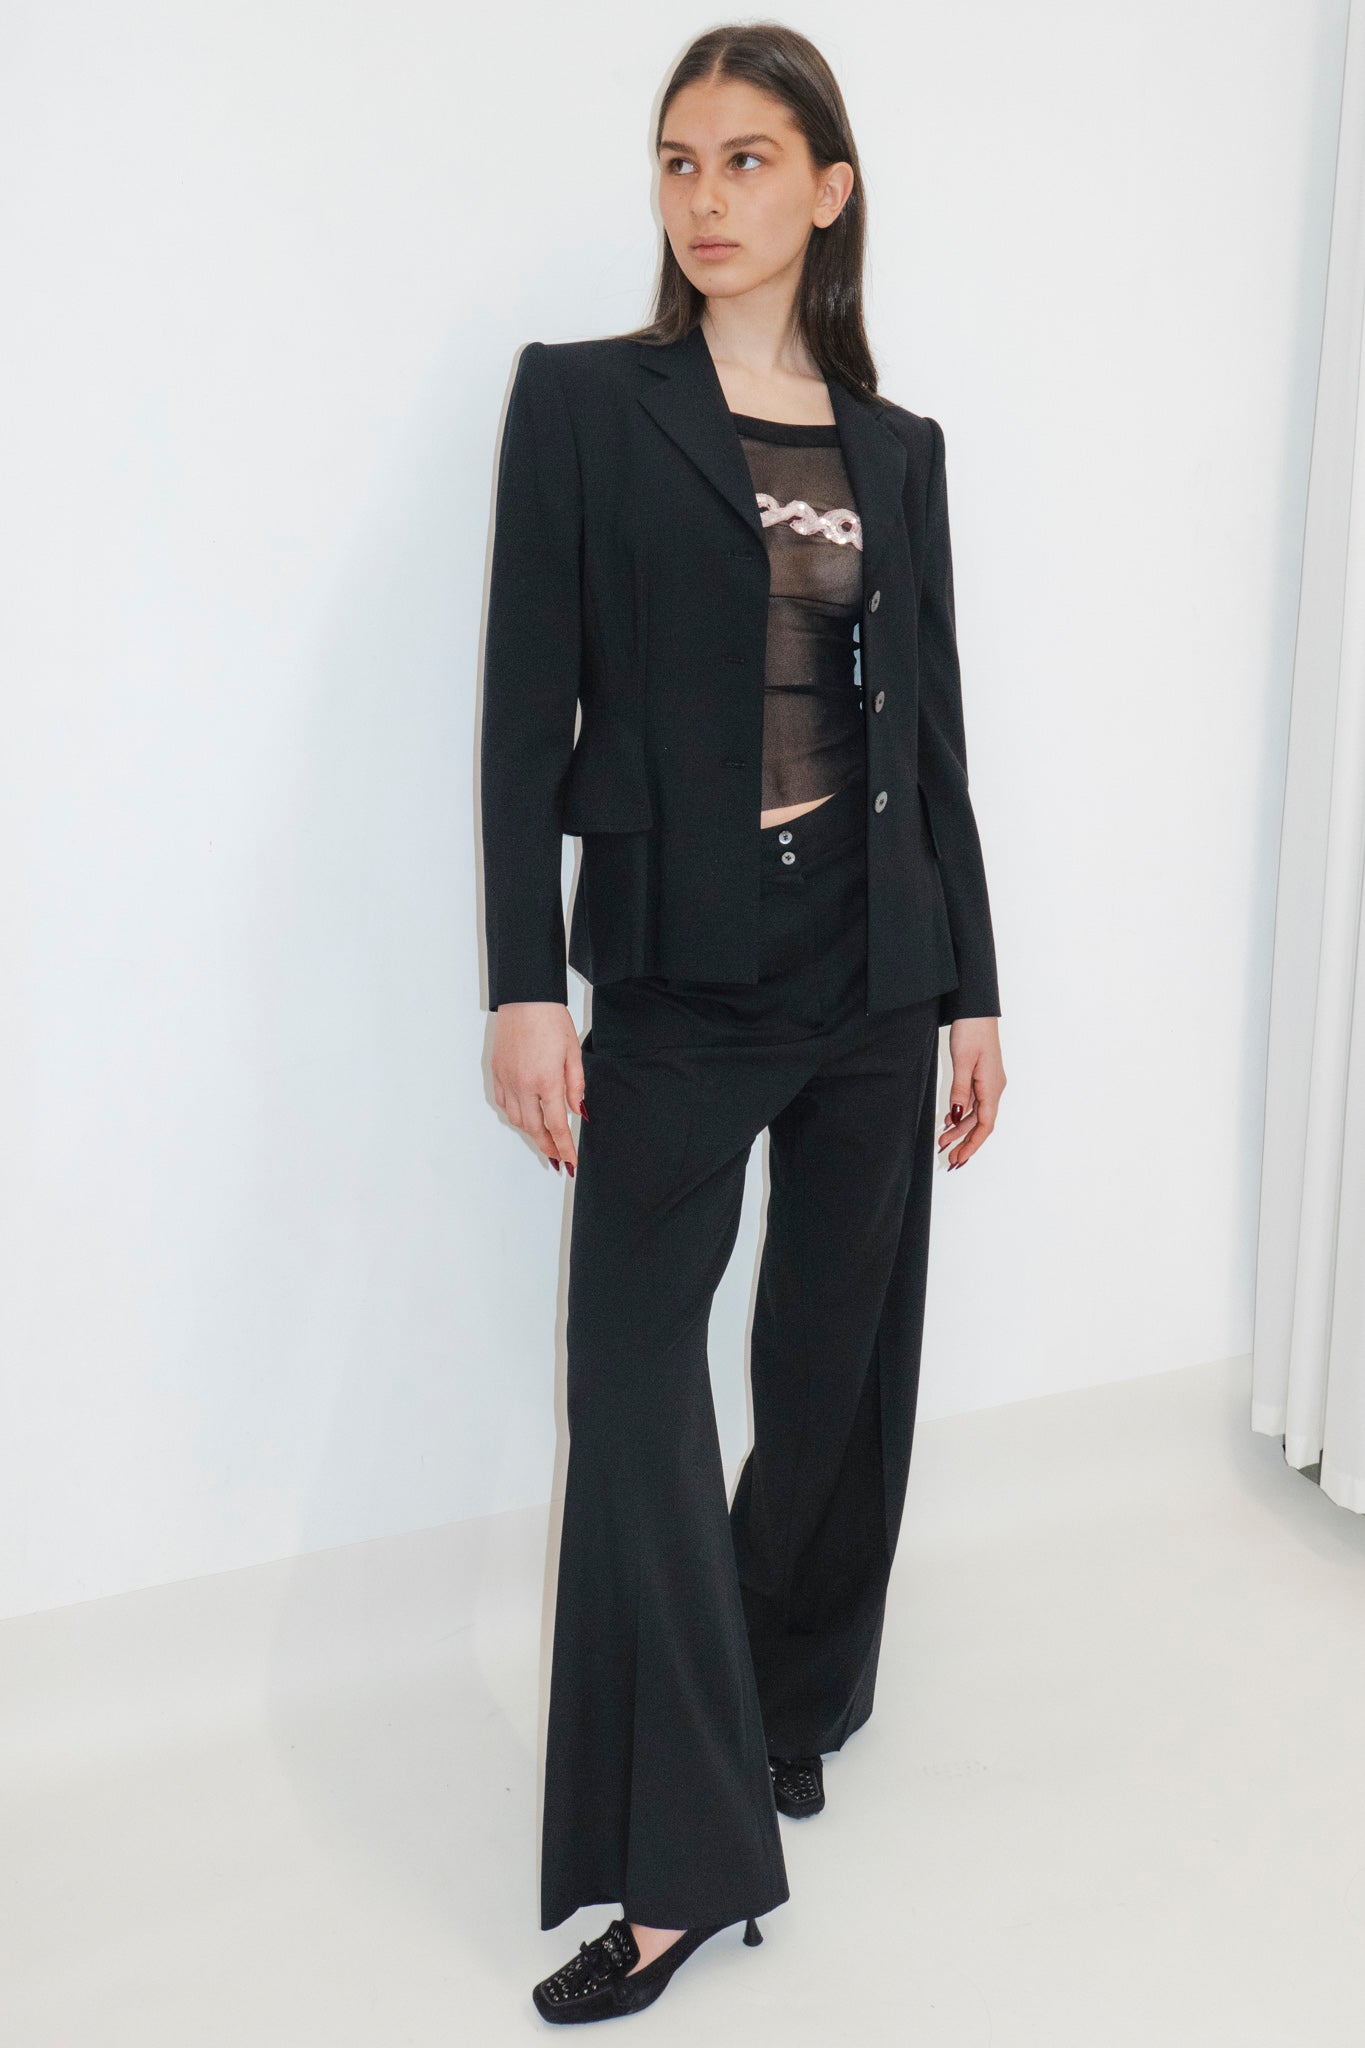 Gianfranco Ferre Structured Pant Suit